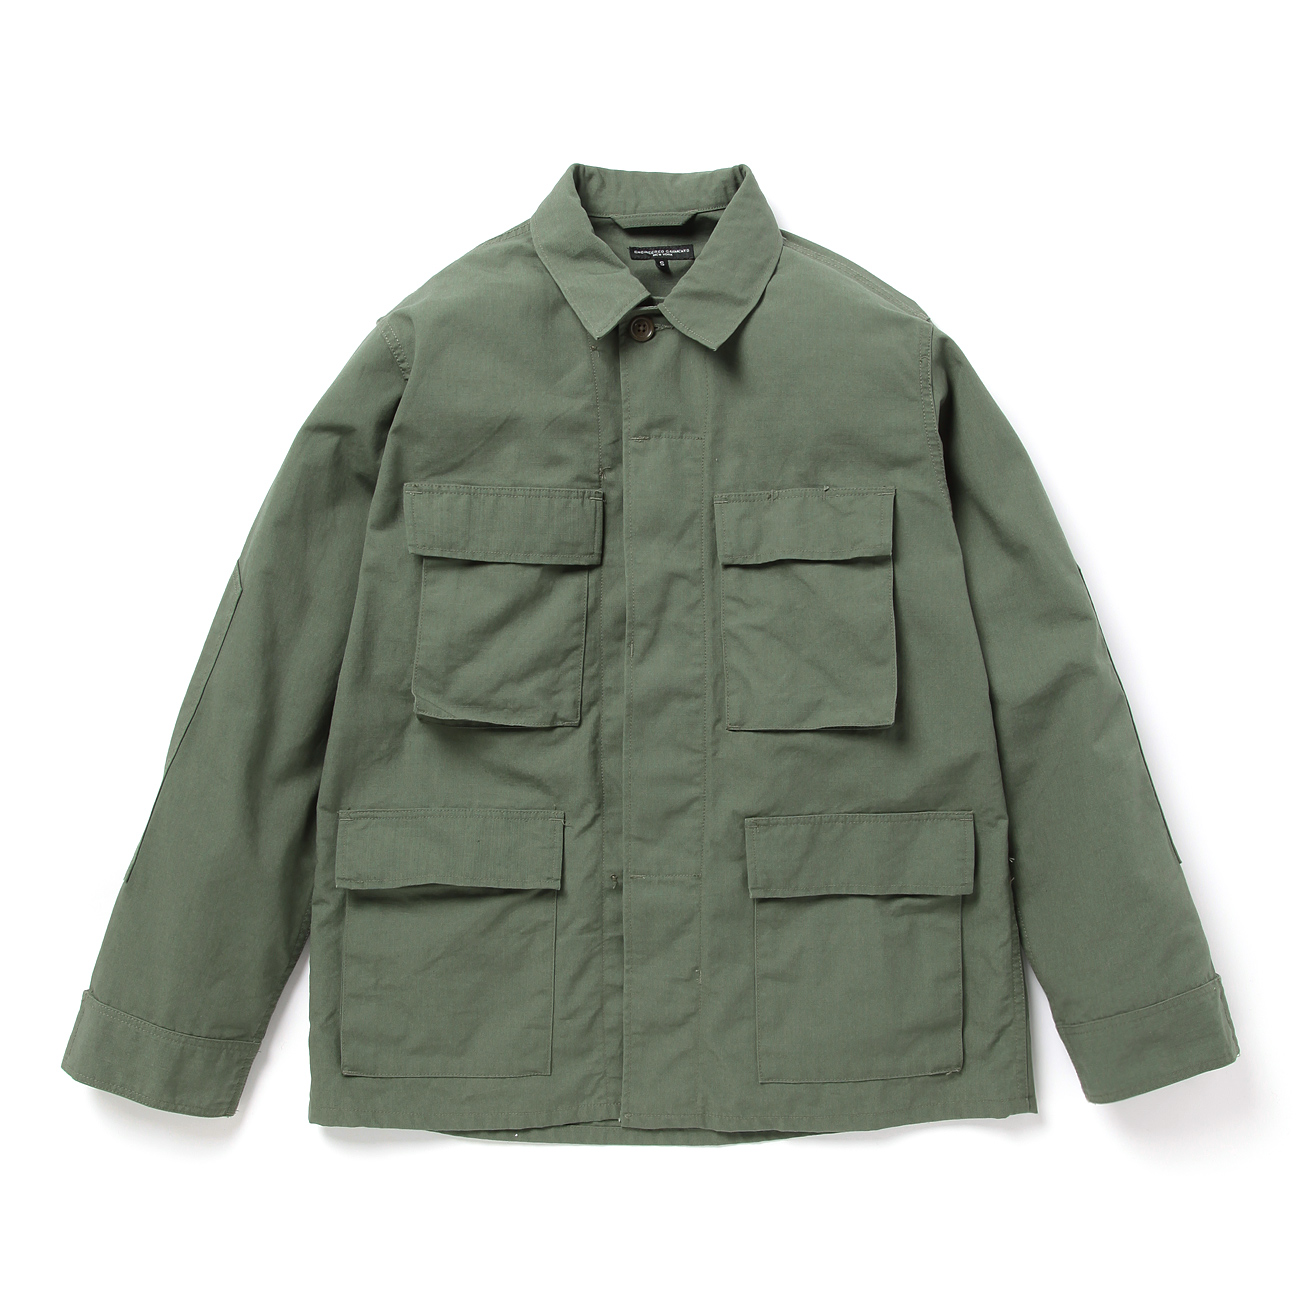 BDU Jacket - Nyco Ripstop - Olive